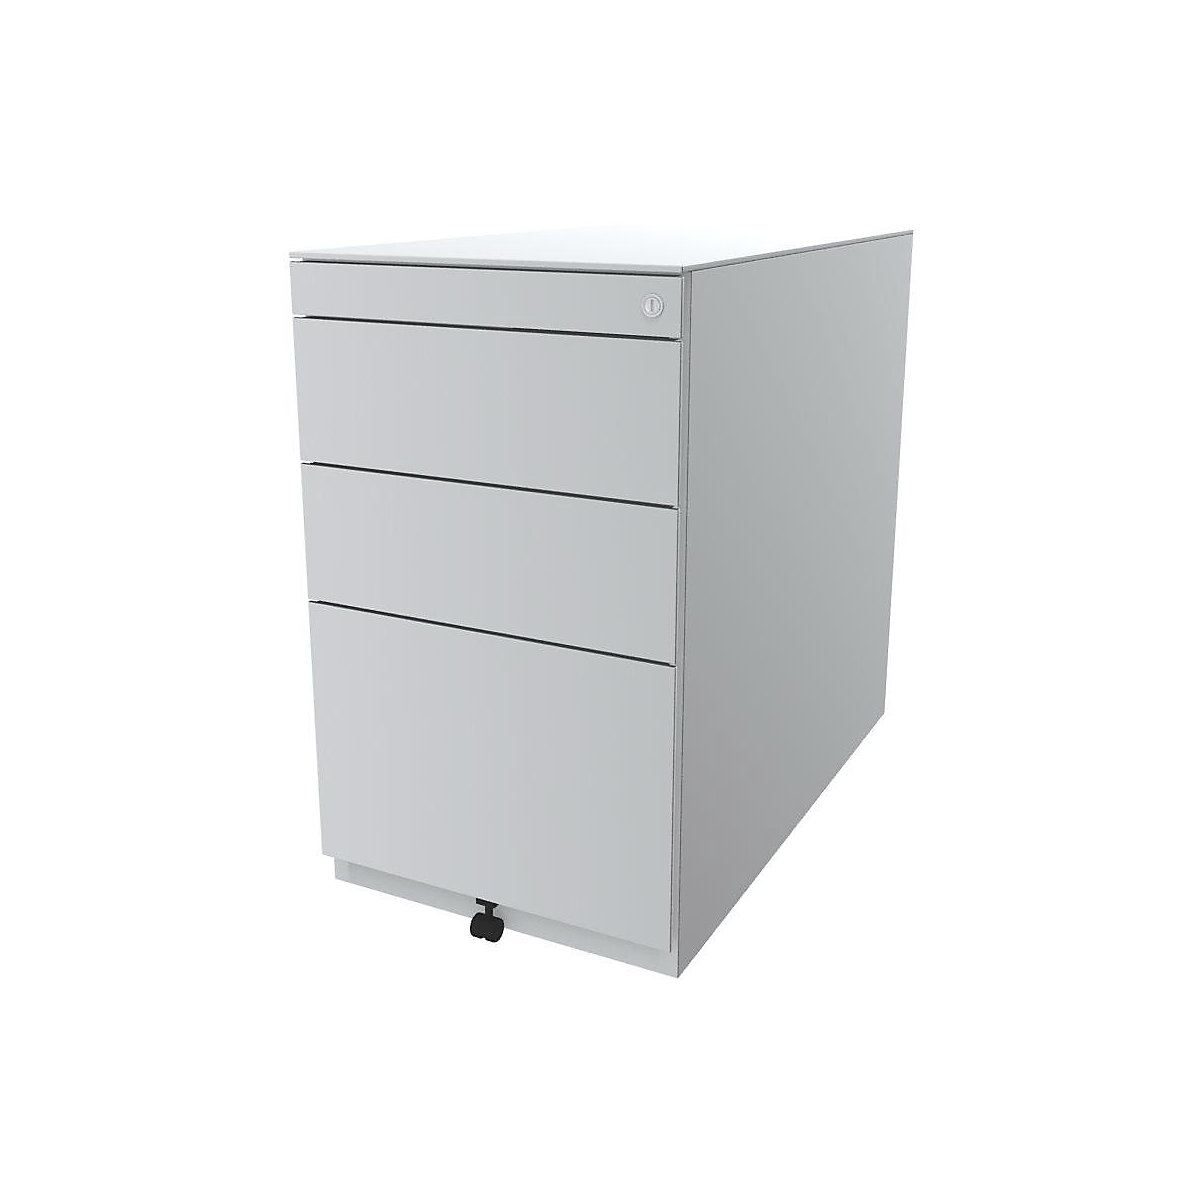 Note™ fixed pedestal, with 2 universal drawers, 1 suspension file drawer – BISLEY, with top, depth 775 mm, traffic white-8